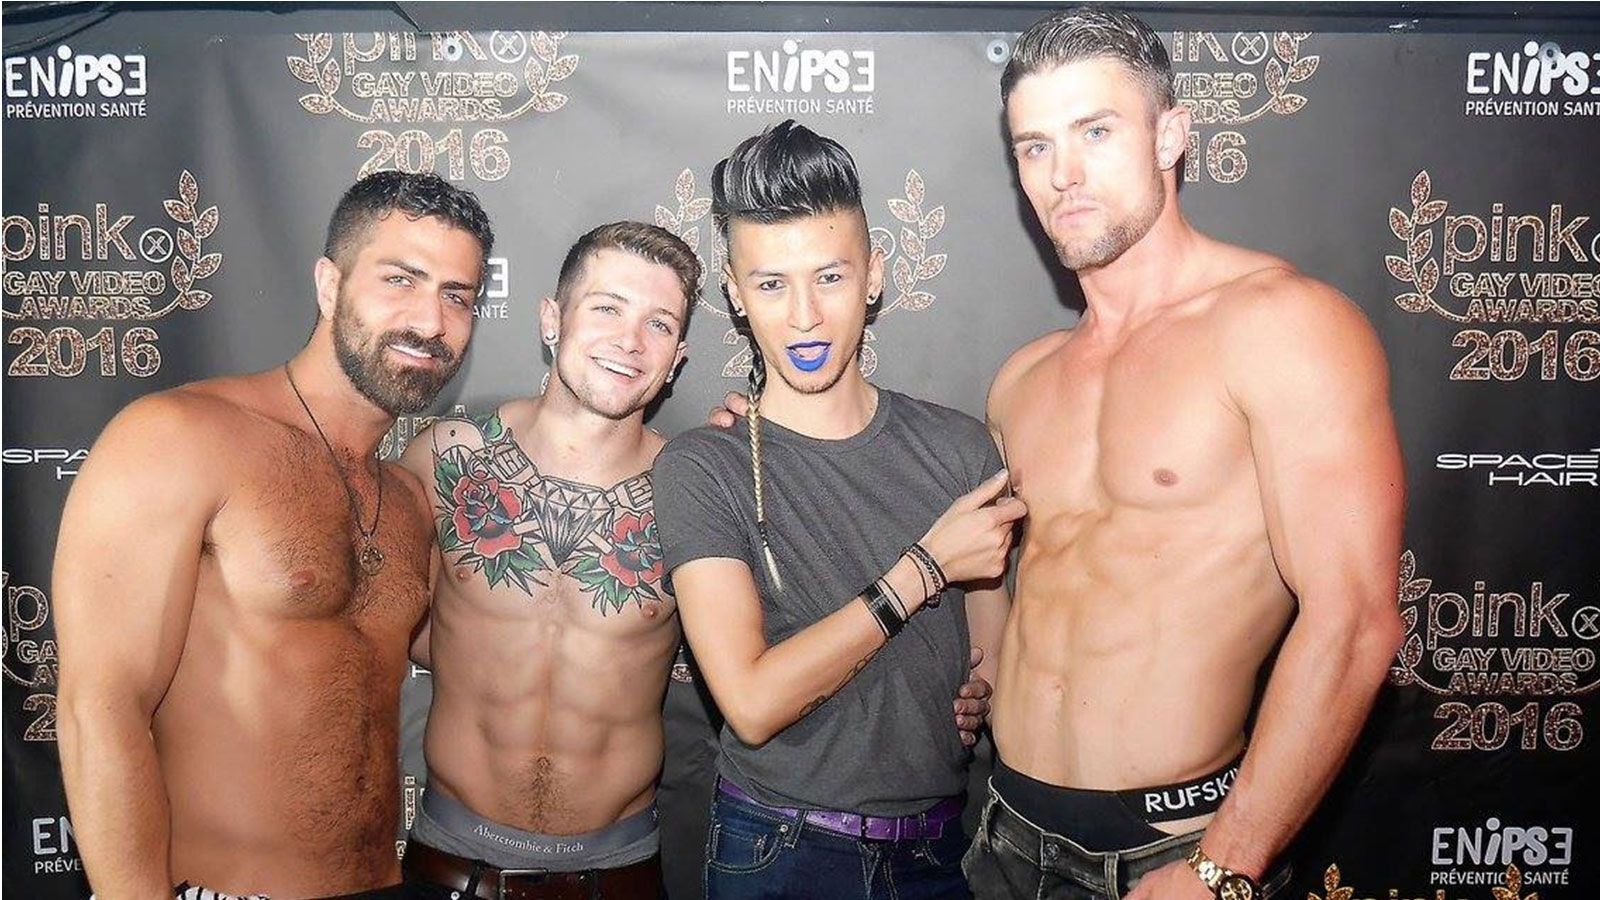 PinkX Gay Video Awards Announces 2016 Winners